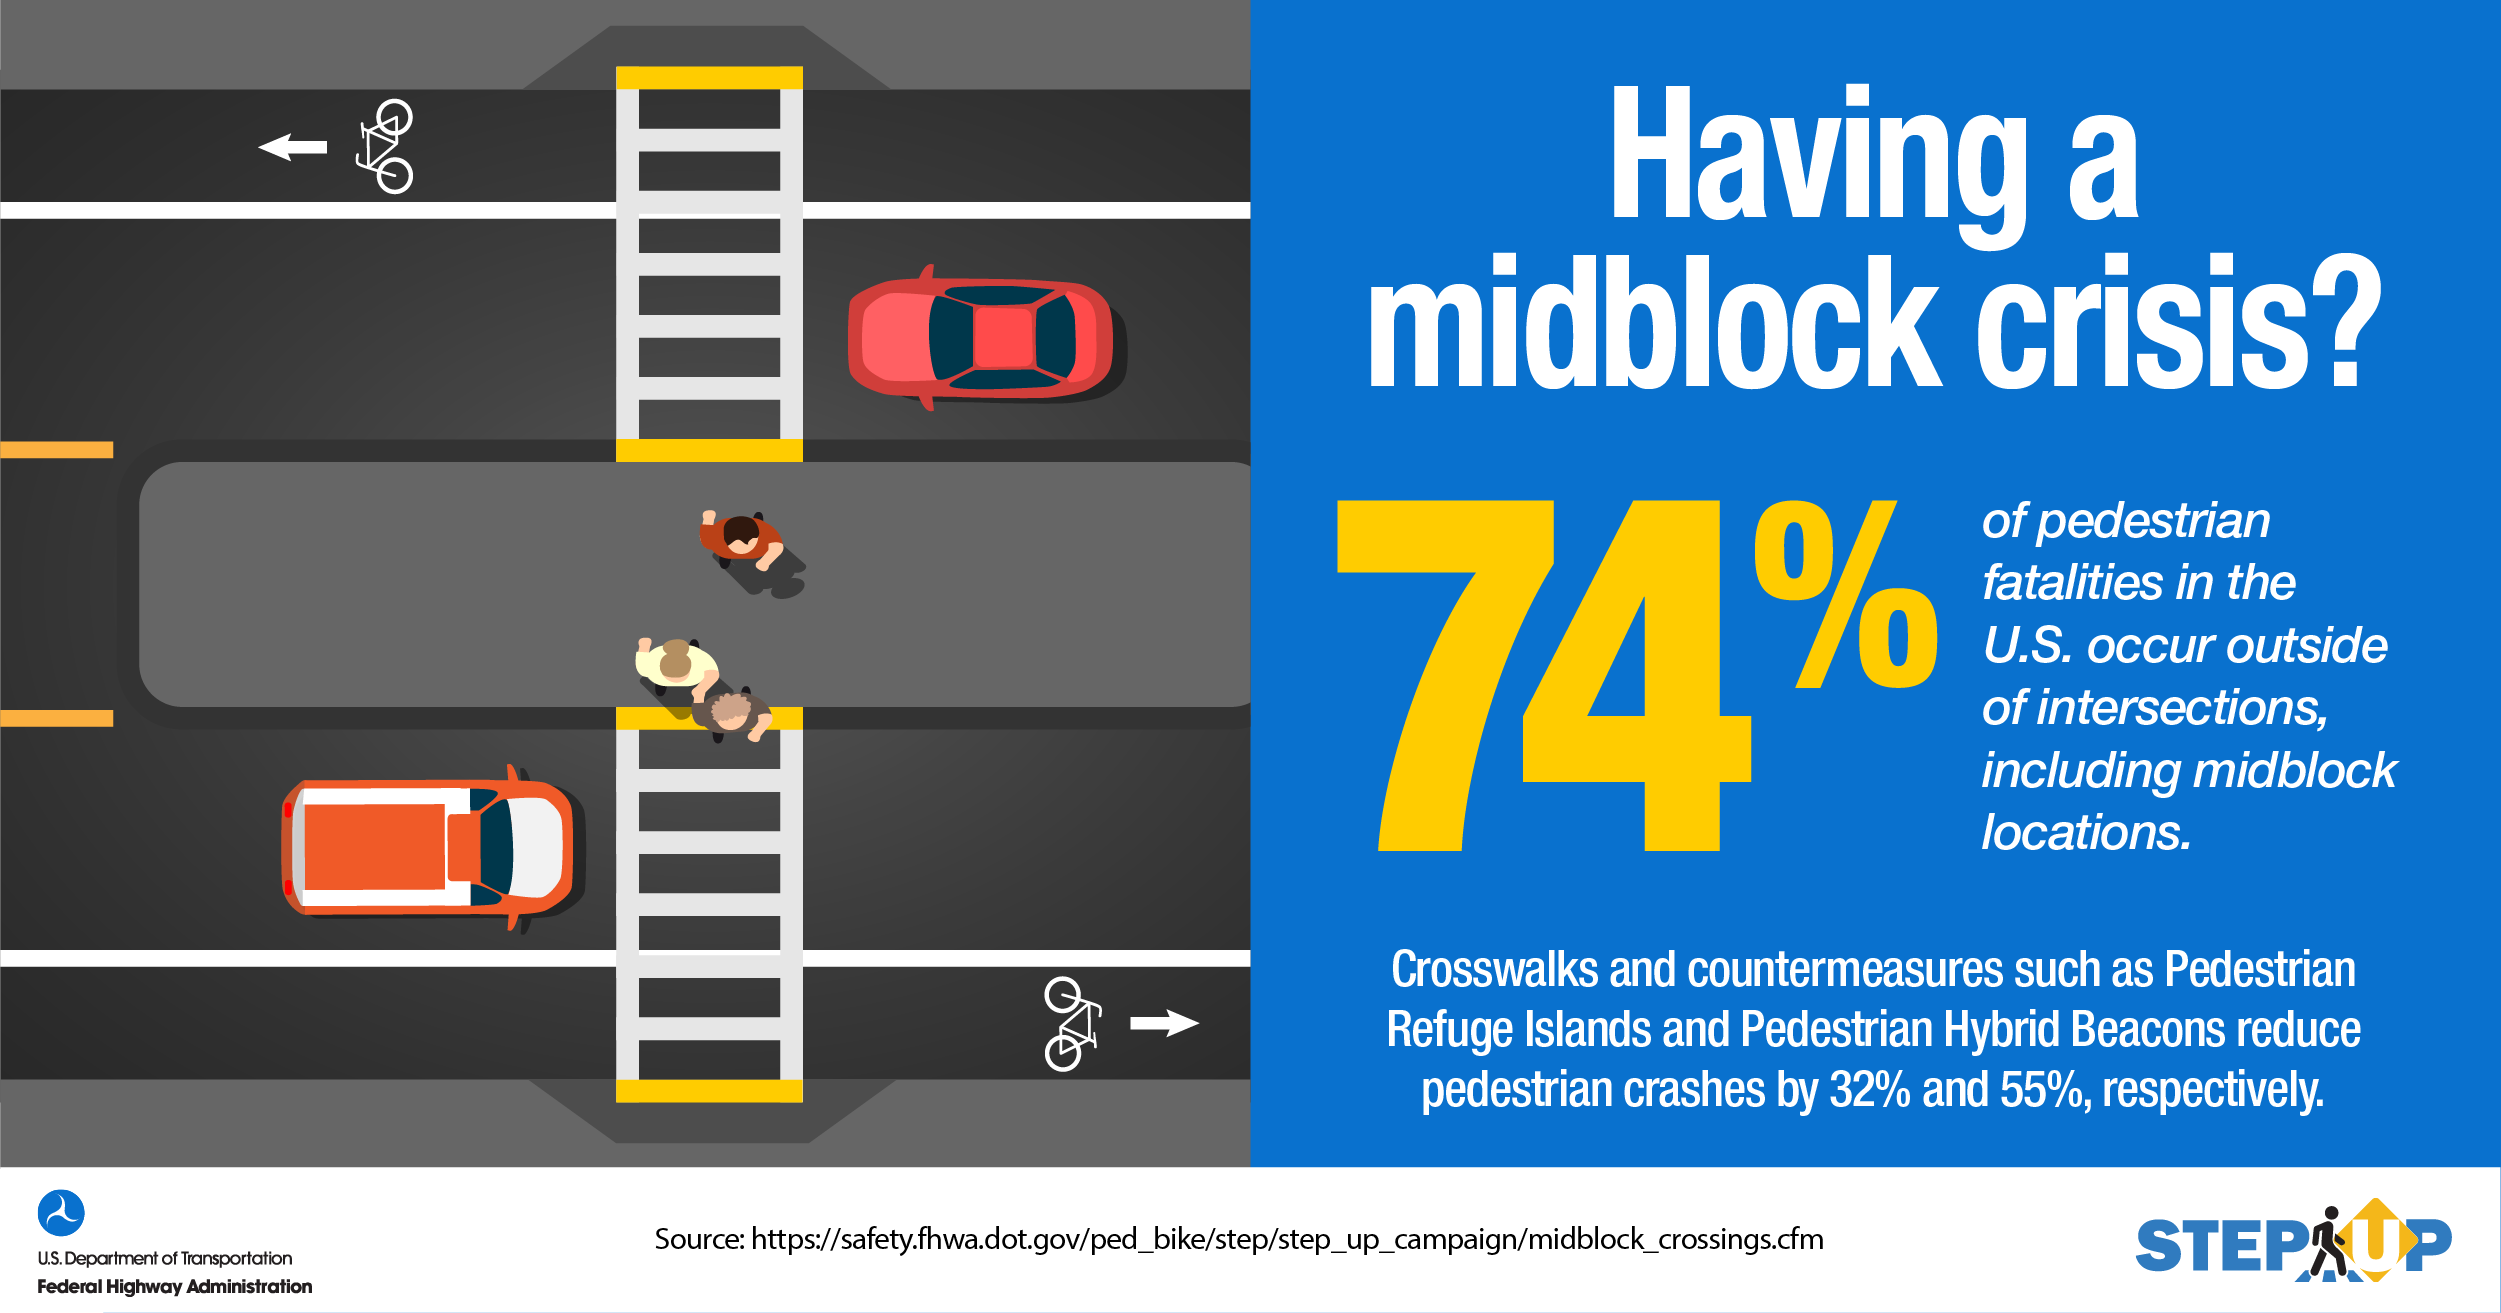 STEP infographic of overhead view of multi-lane traffic with a crosswalk, separated by a median. "Having a midblock crisis? 74% of pedestrian fatalities in the U.S. occur outside of intersections including midblock locations. Crosswalks and countermeasures such as Pedestrian Refuge Islands and Pedestrian Hybrid Beacons reduce pedestrian crashes by 32% and 55% respectively."